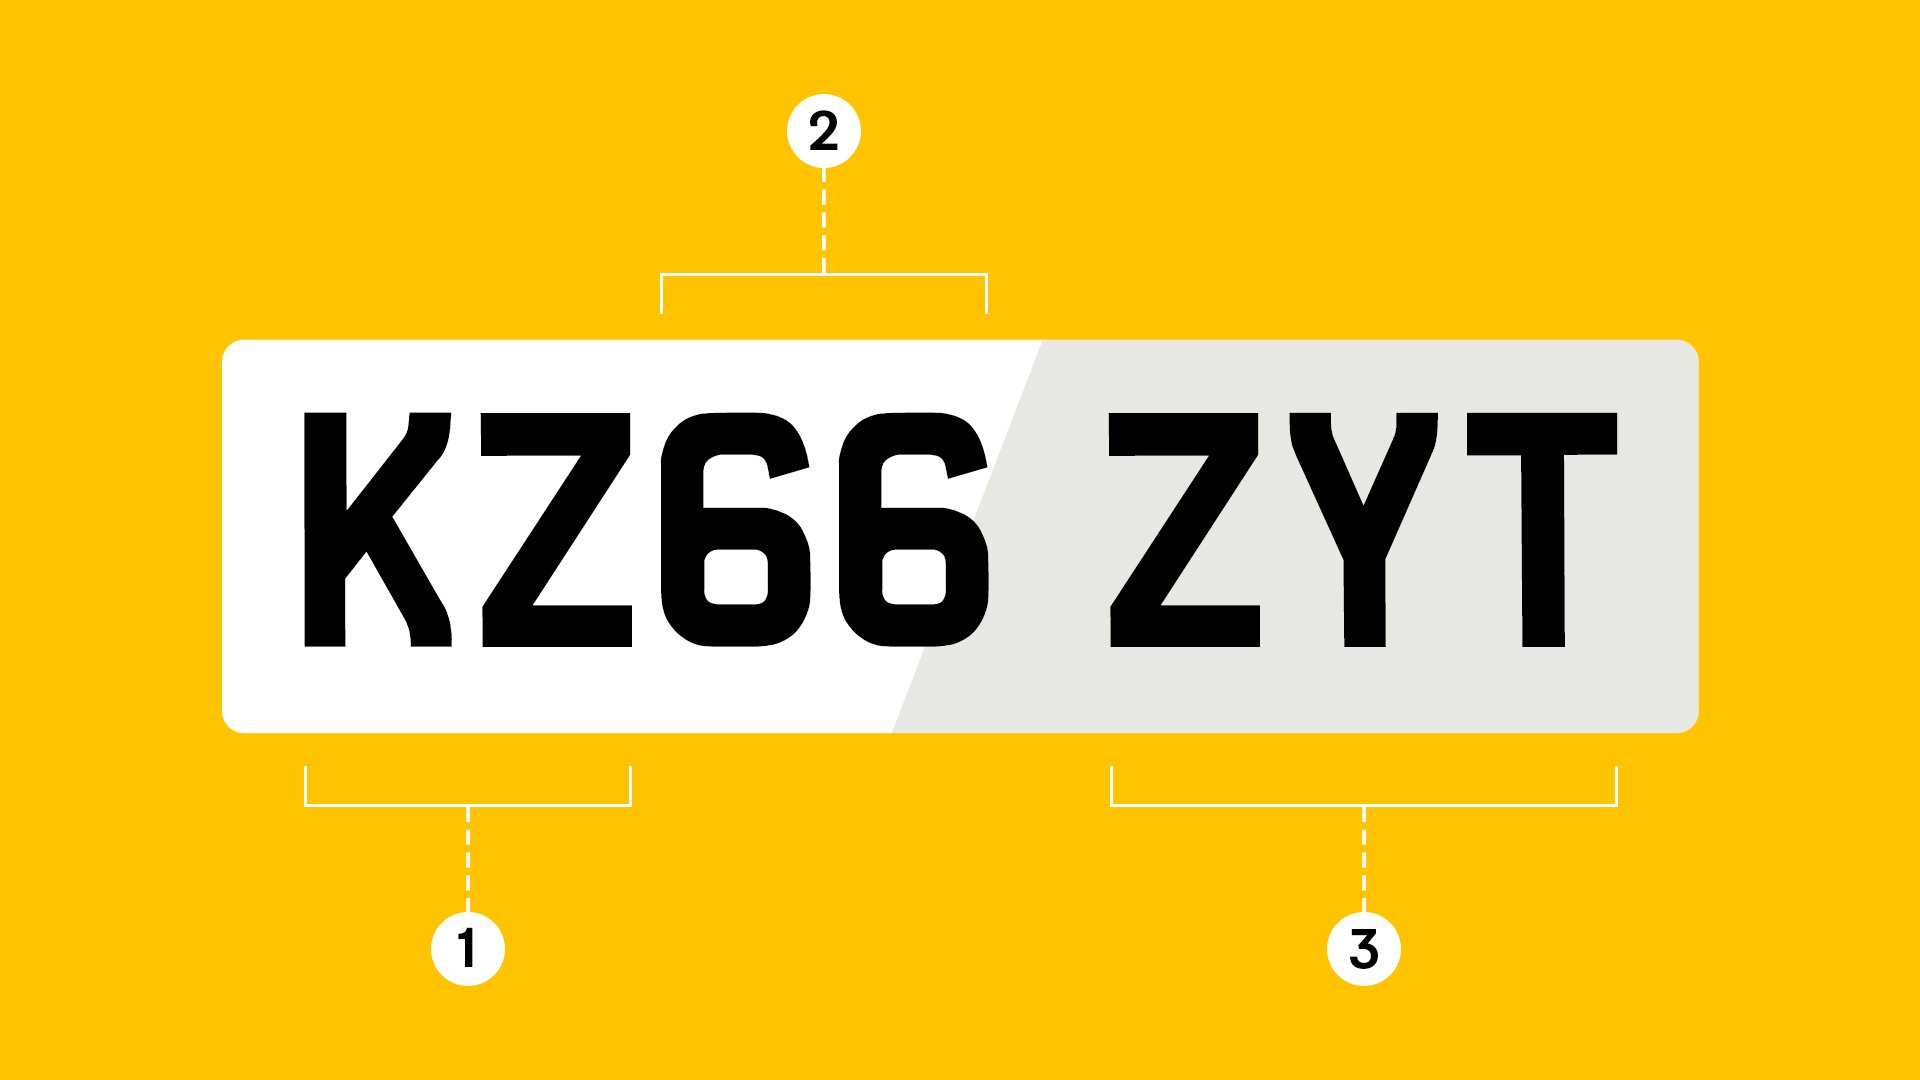 cinta crimen debate 72 plates out now: what do UK number plates mean? | AutoTrader